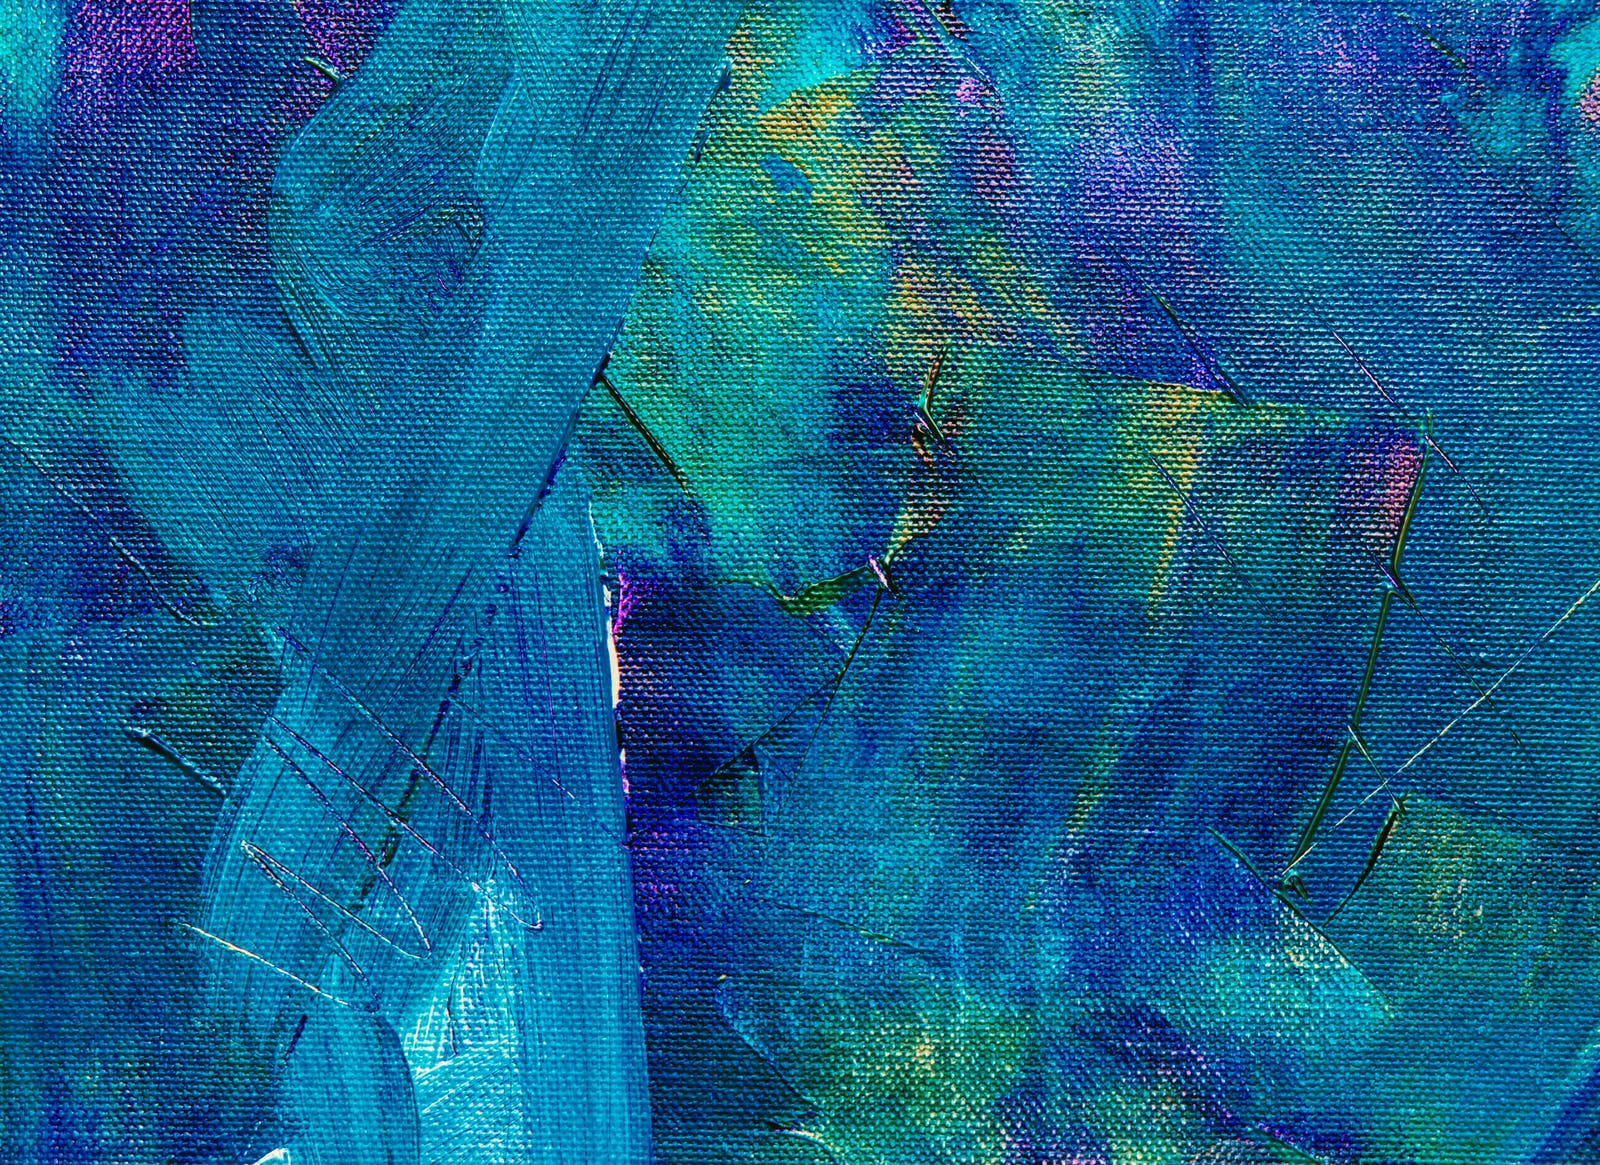 Blue Painting Rough Texture On Paper Wallpaper